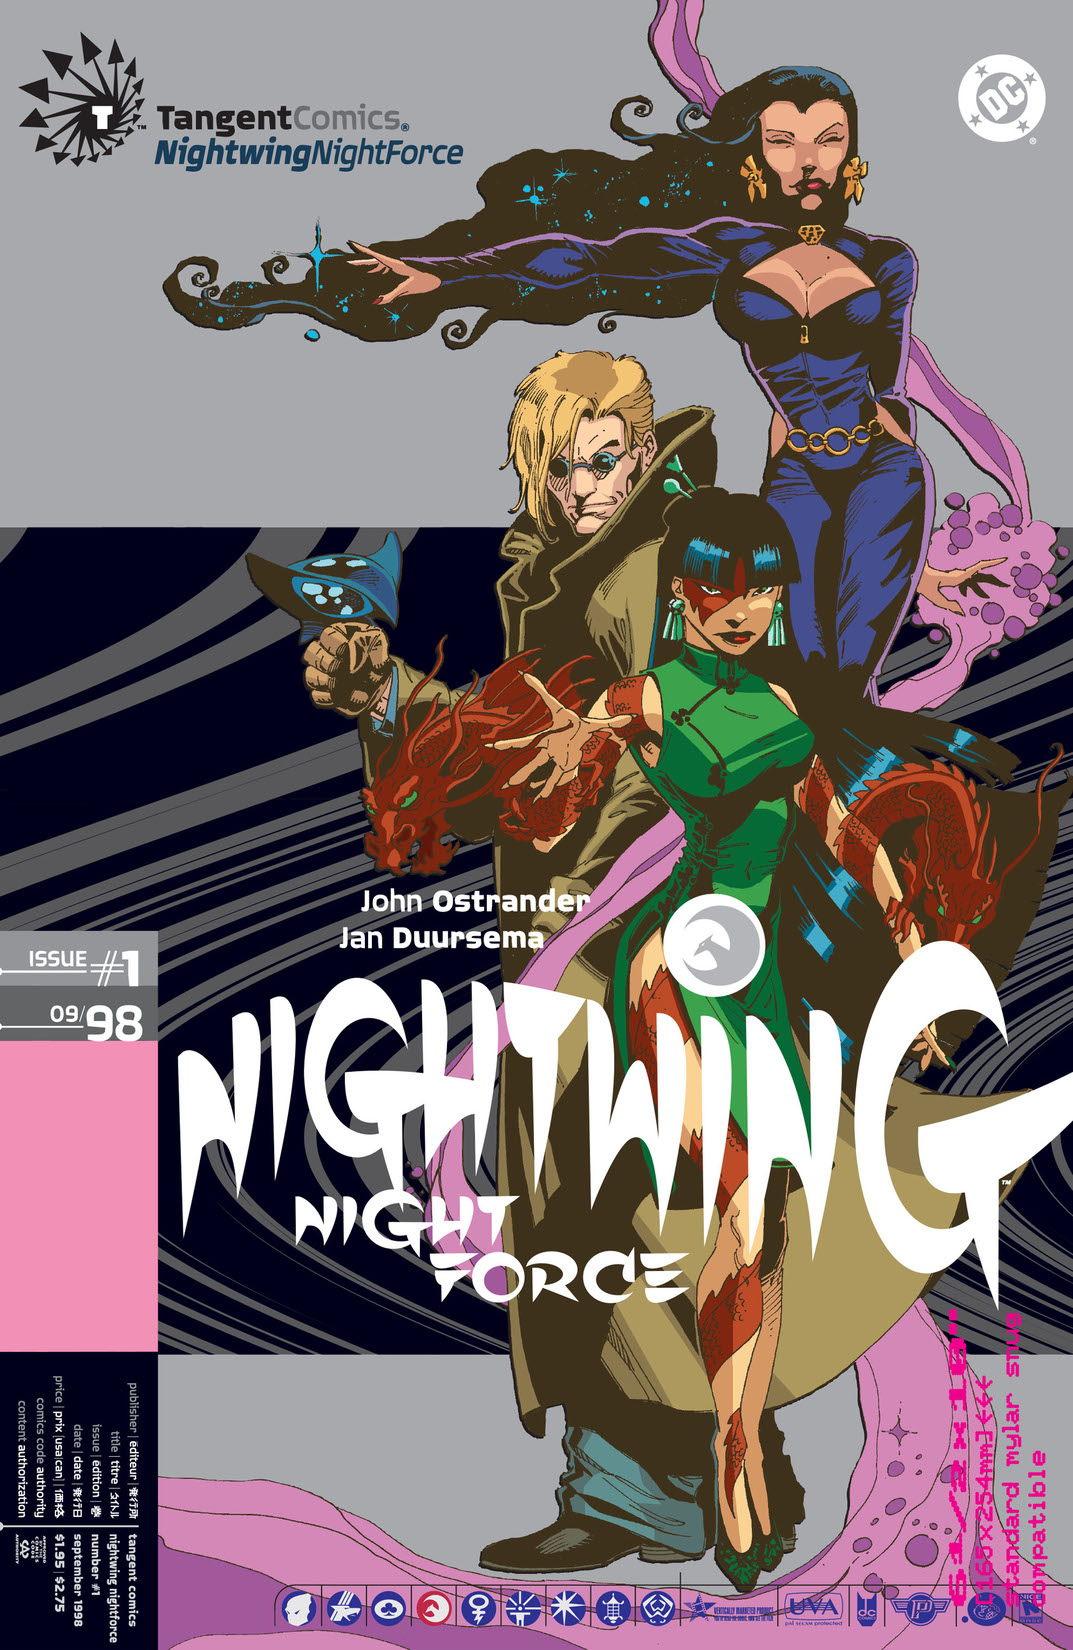 Nightwing: Night Force #1 preview images